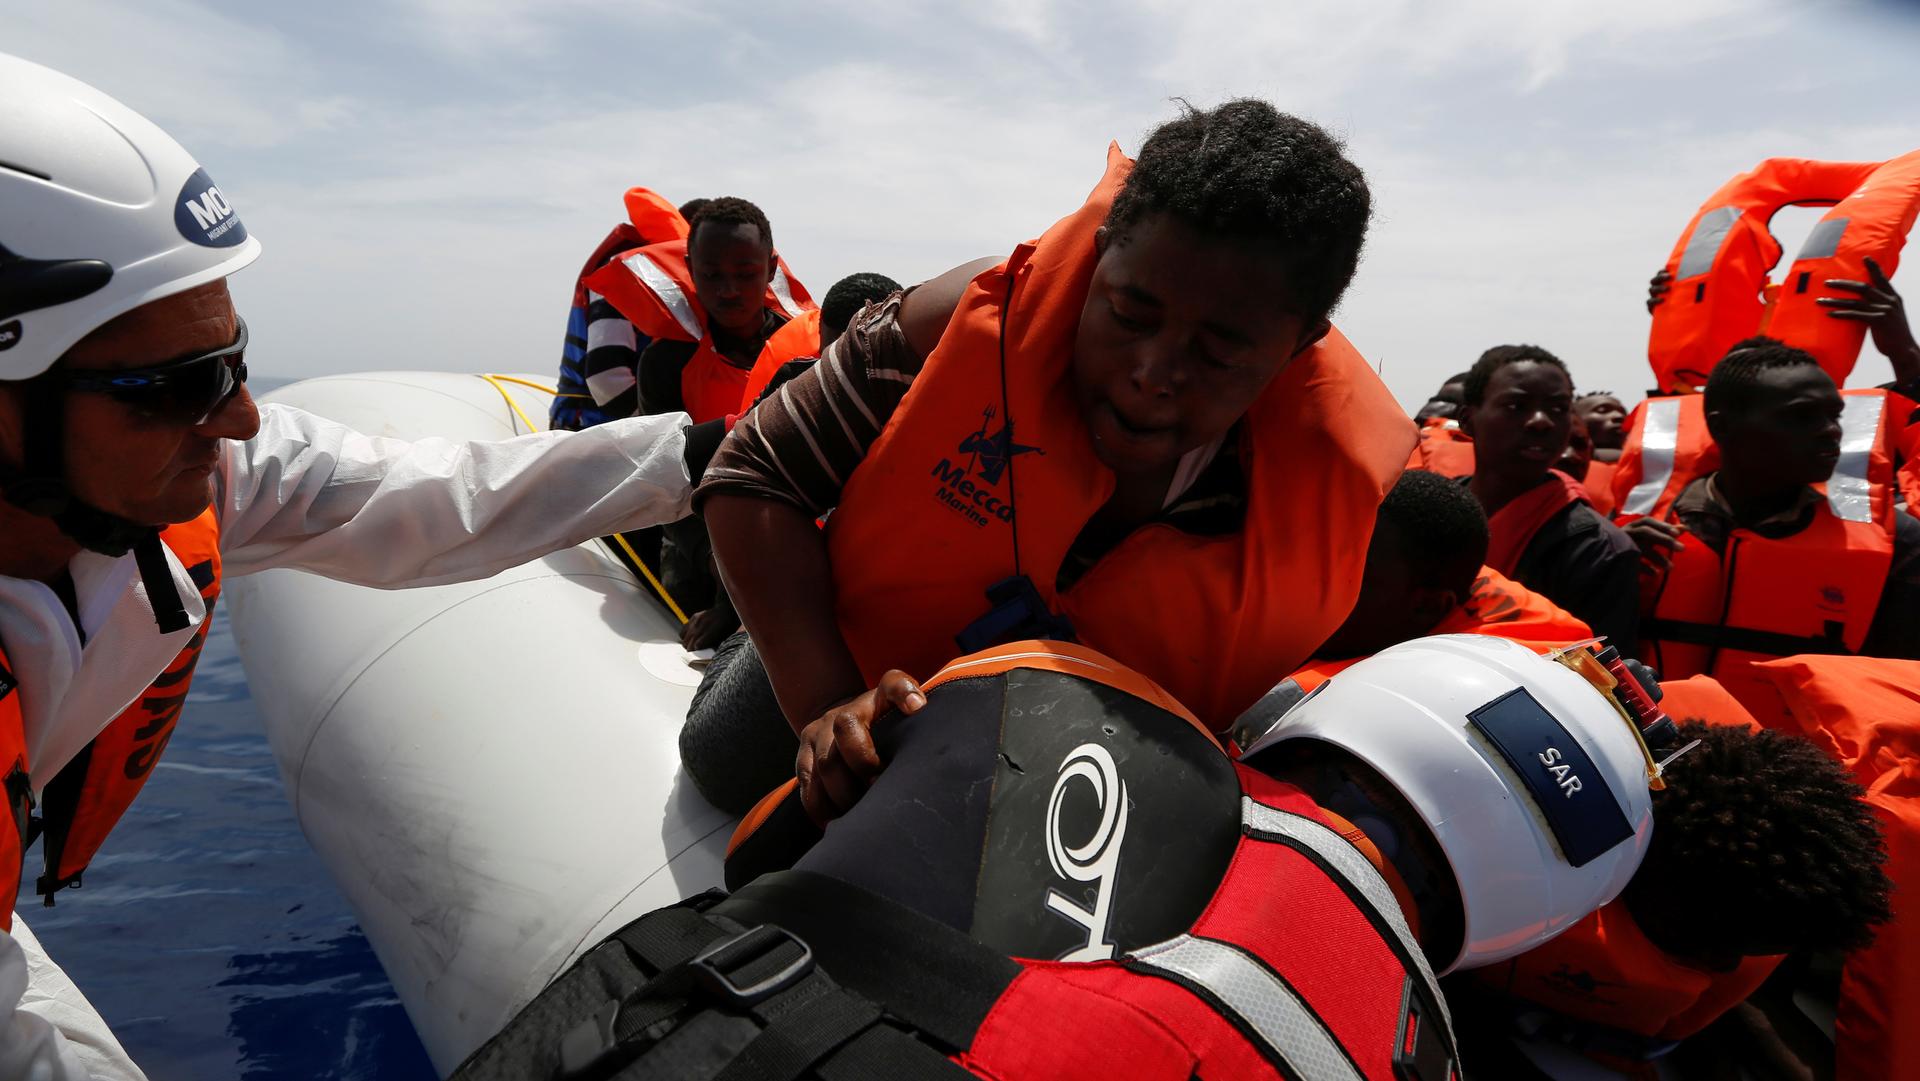 Migrant Offshore Aid Station rescues migrants from a rubber dinghy during an operation in the central Mediterranean